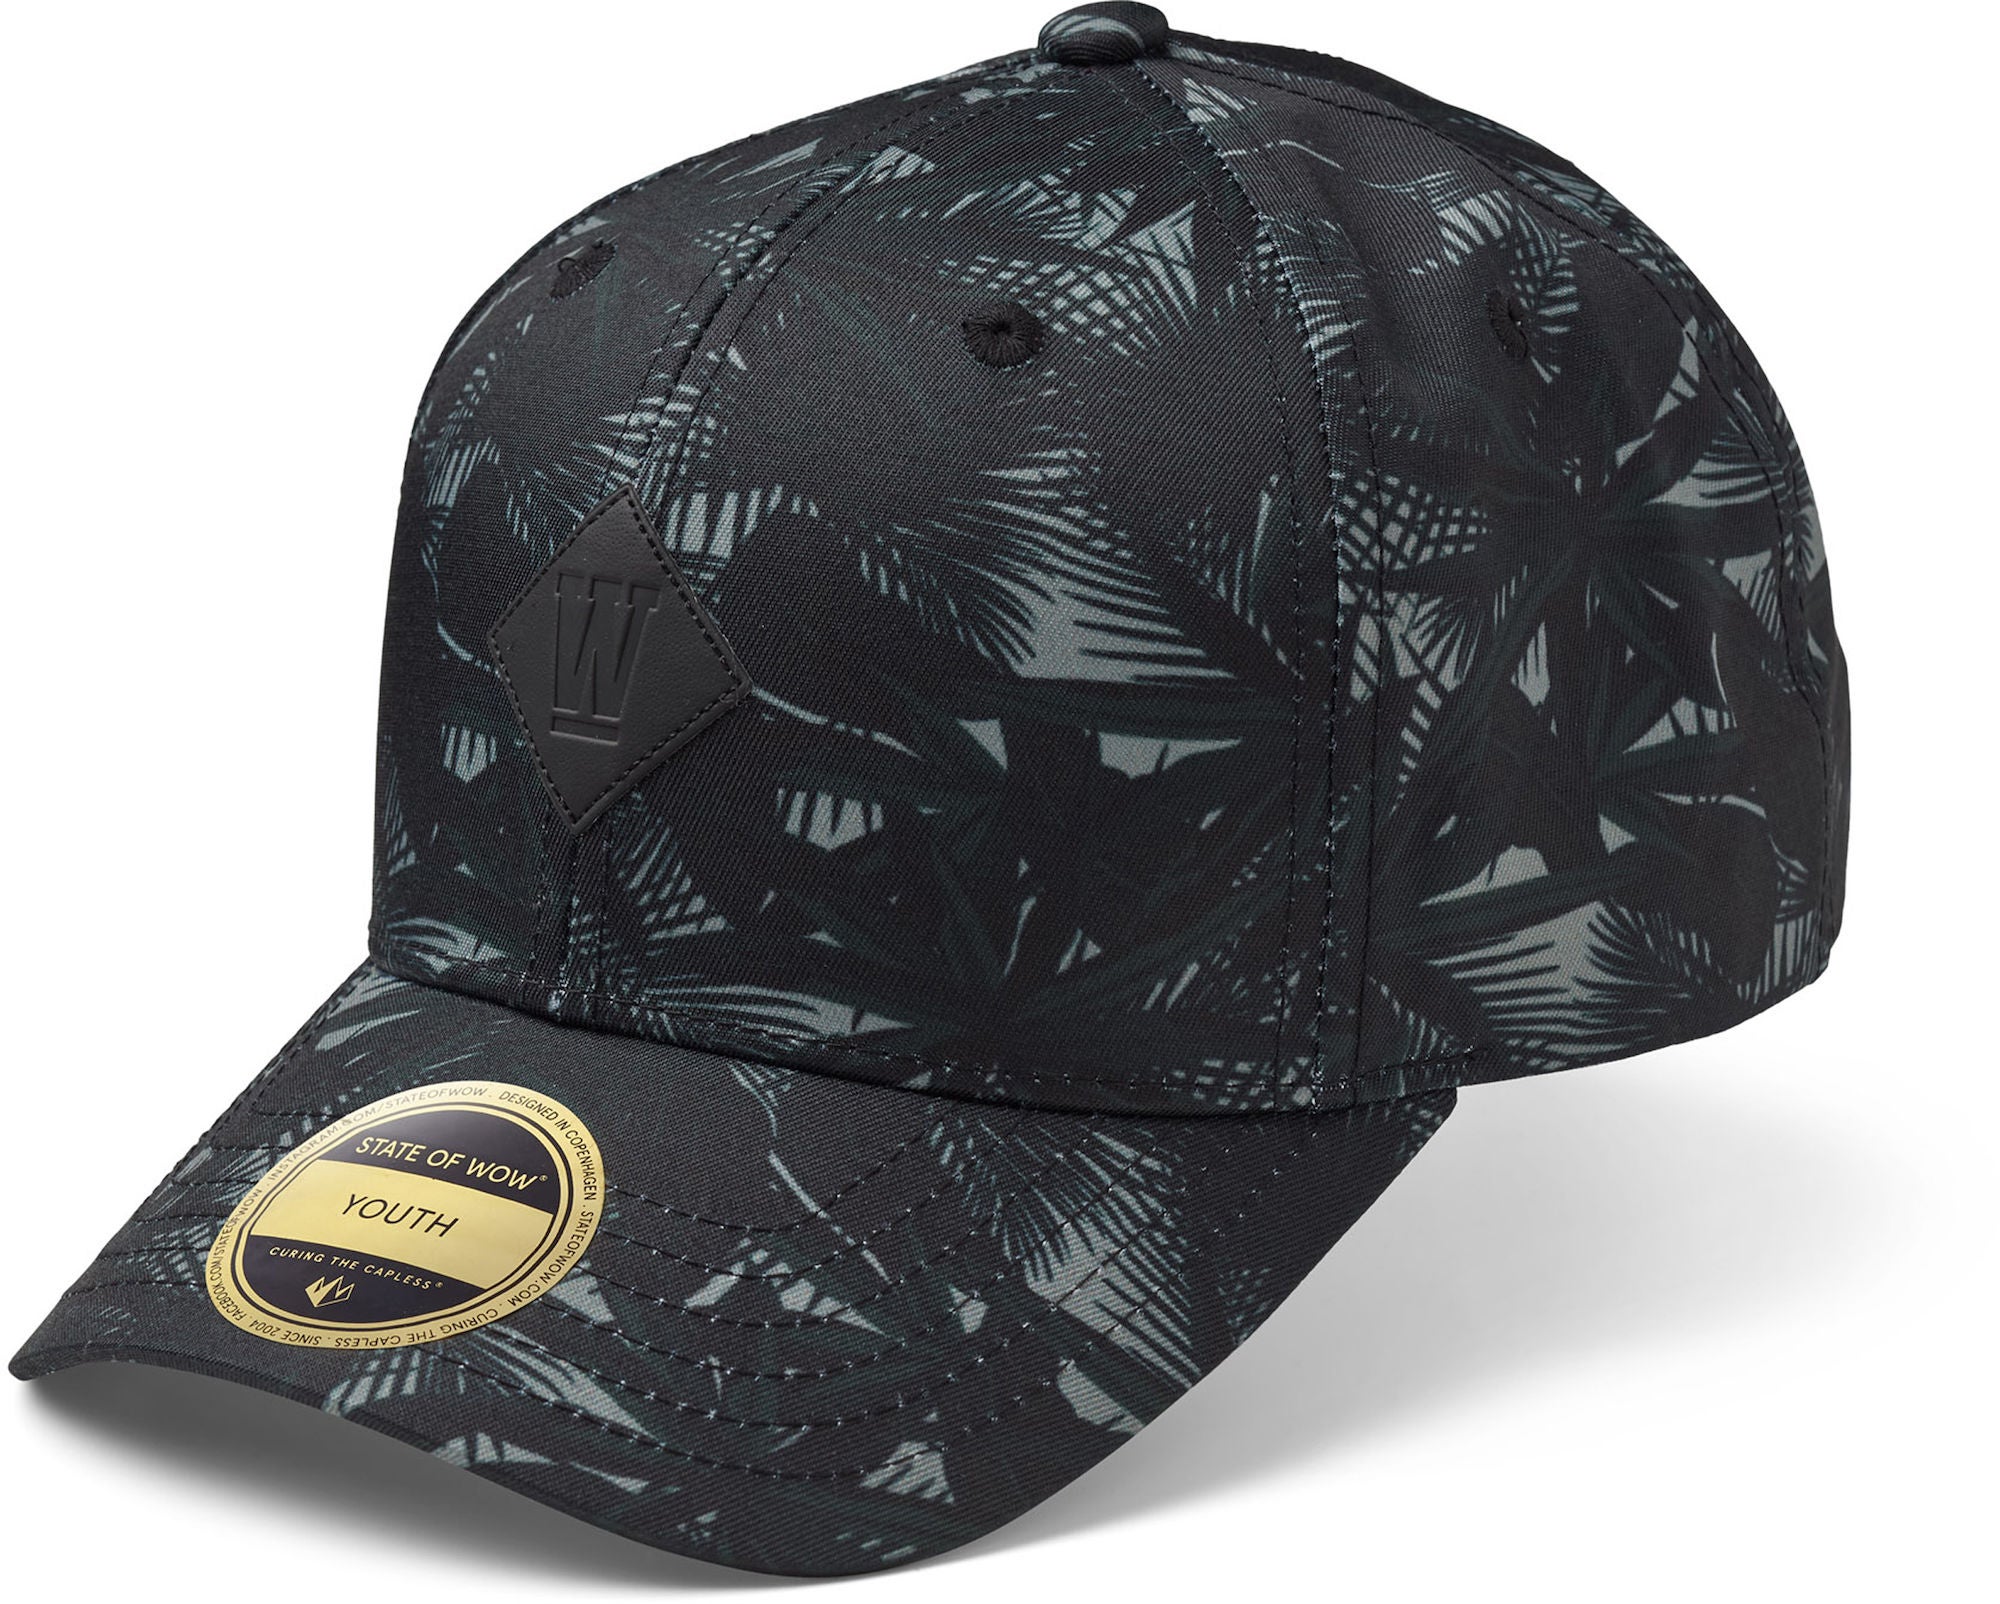 State of WOW Blues Youth Cap, Army